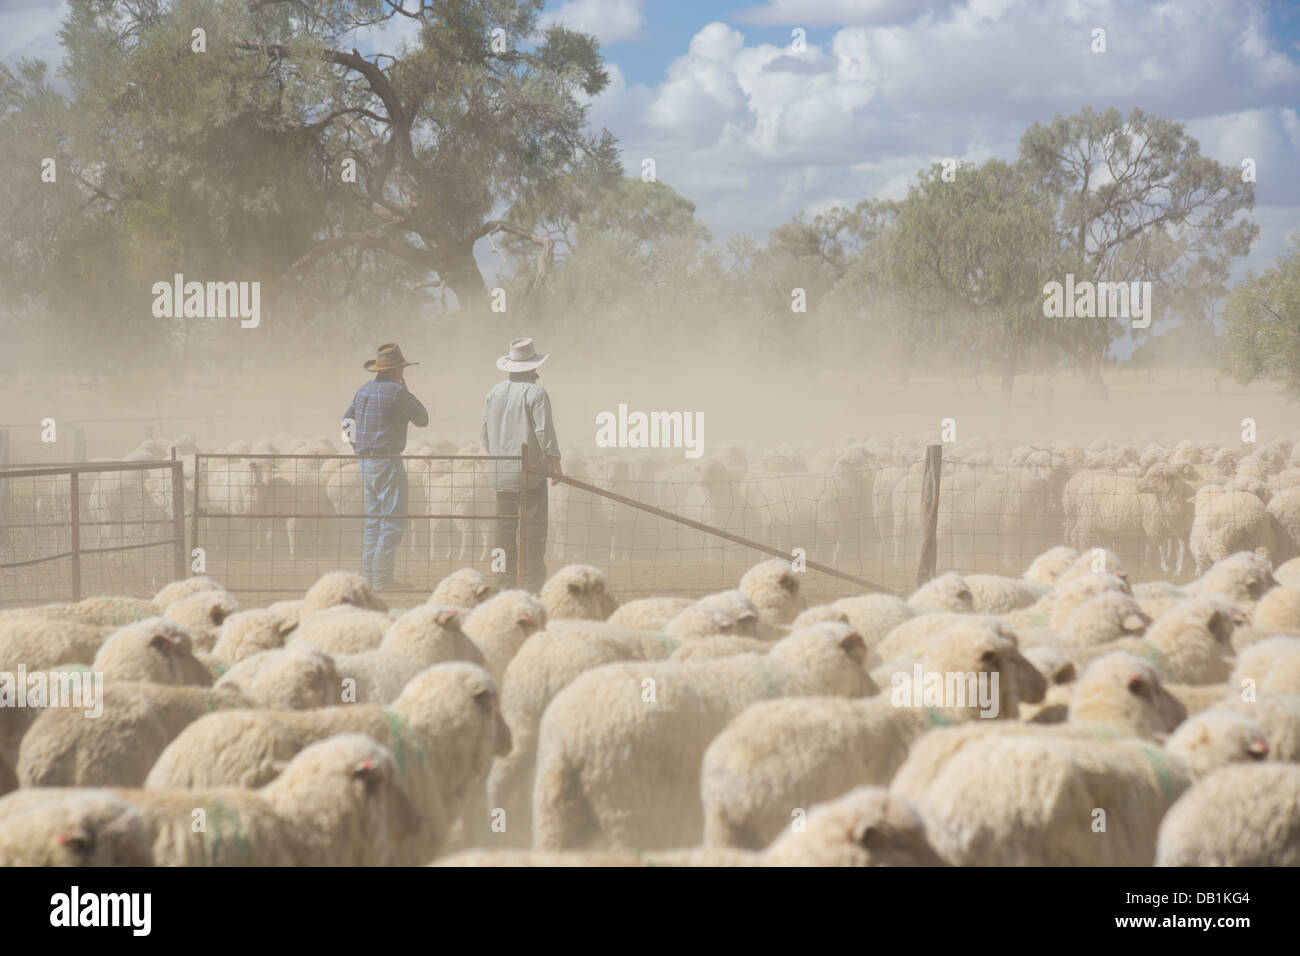 Farmers with a mob of merino sheep in a dusty pen in outback Queensland, Australia Stock Photo